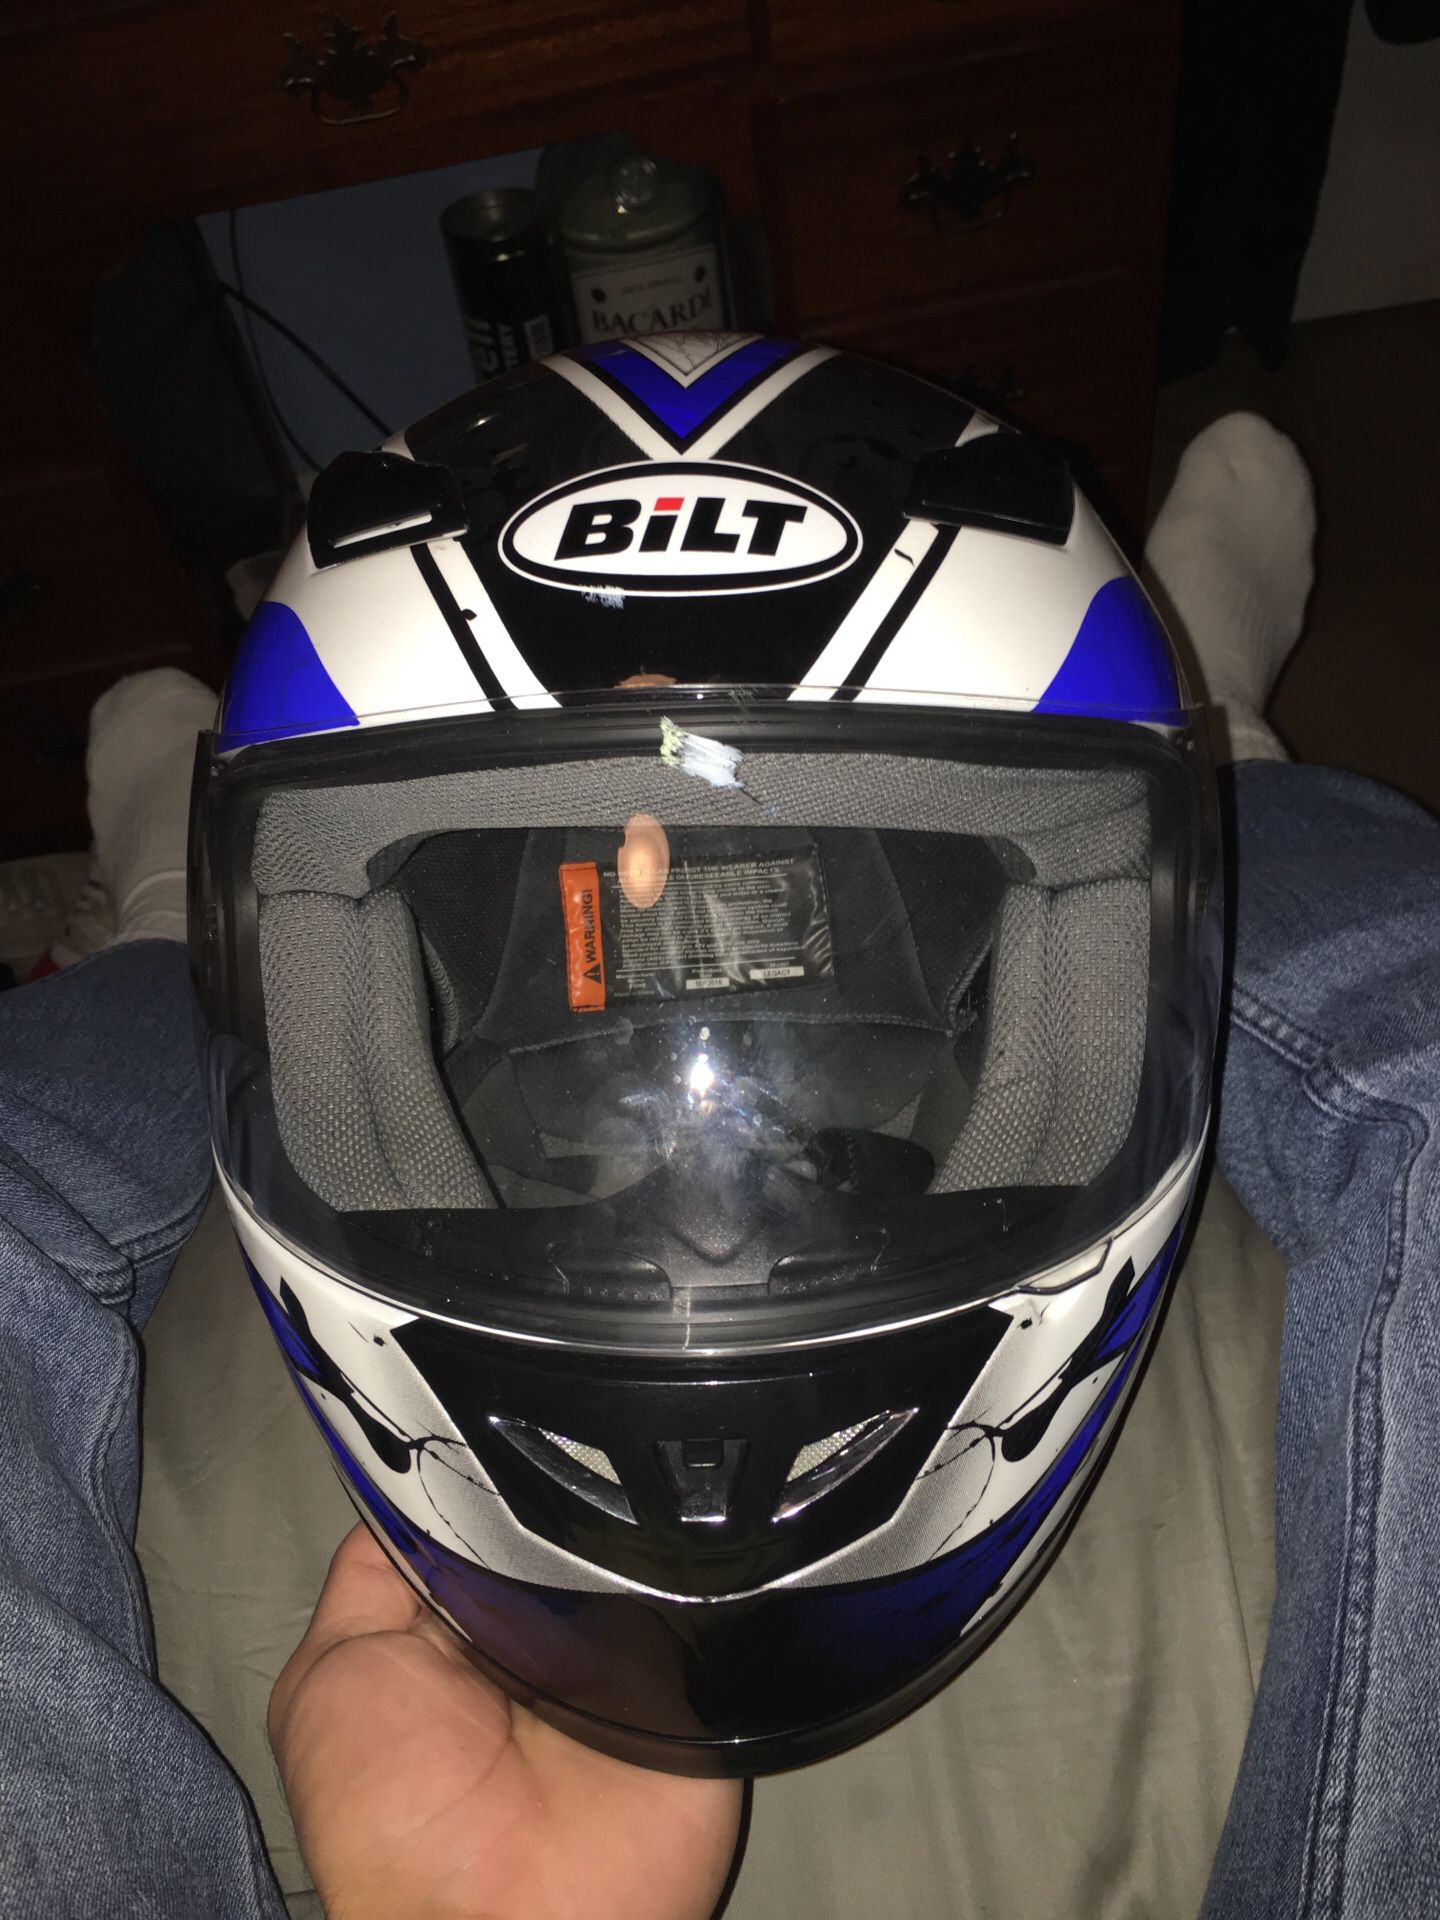 Motorcycle helmet for sale, XL, put it on while you ride.